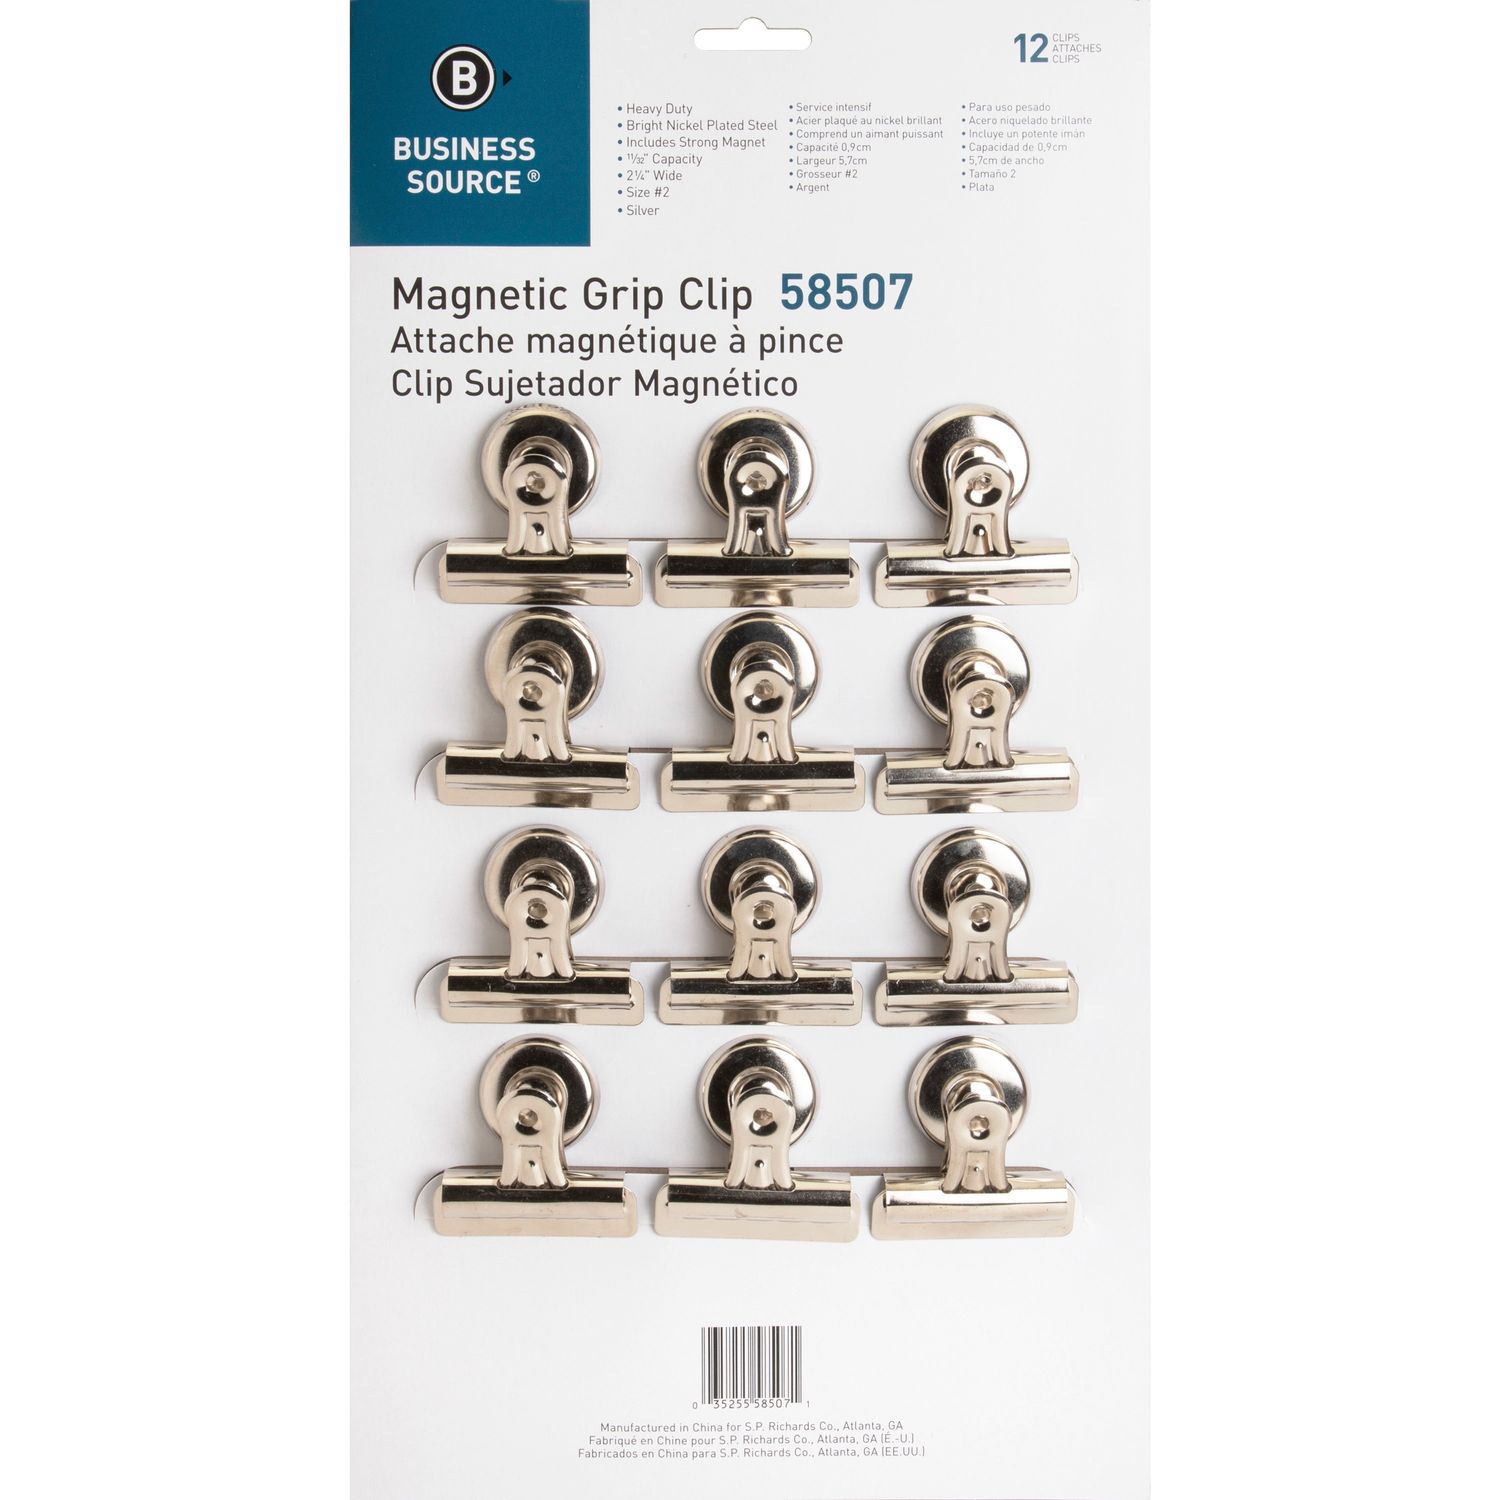 Magnetic Grip Clips Pack No. 2, 2.3" Width, for Paper, Magnetic, Heavy Duty, 12 / Box, Silver, Nickel Plated Steel